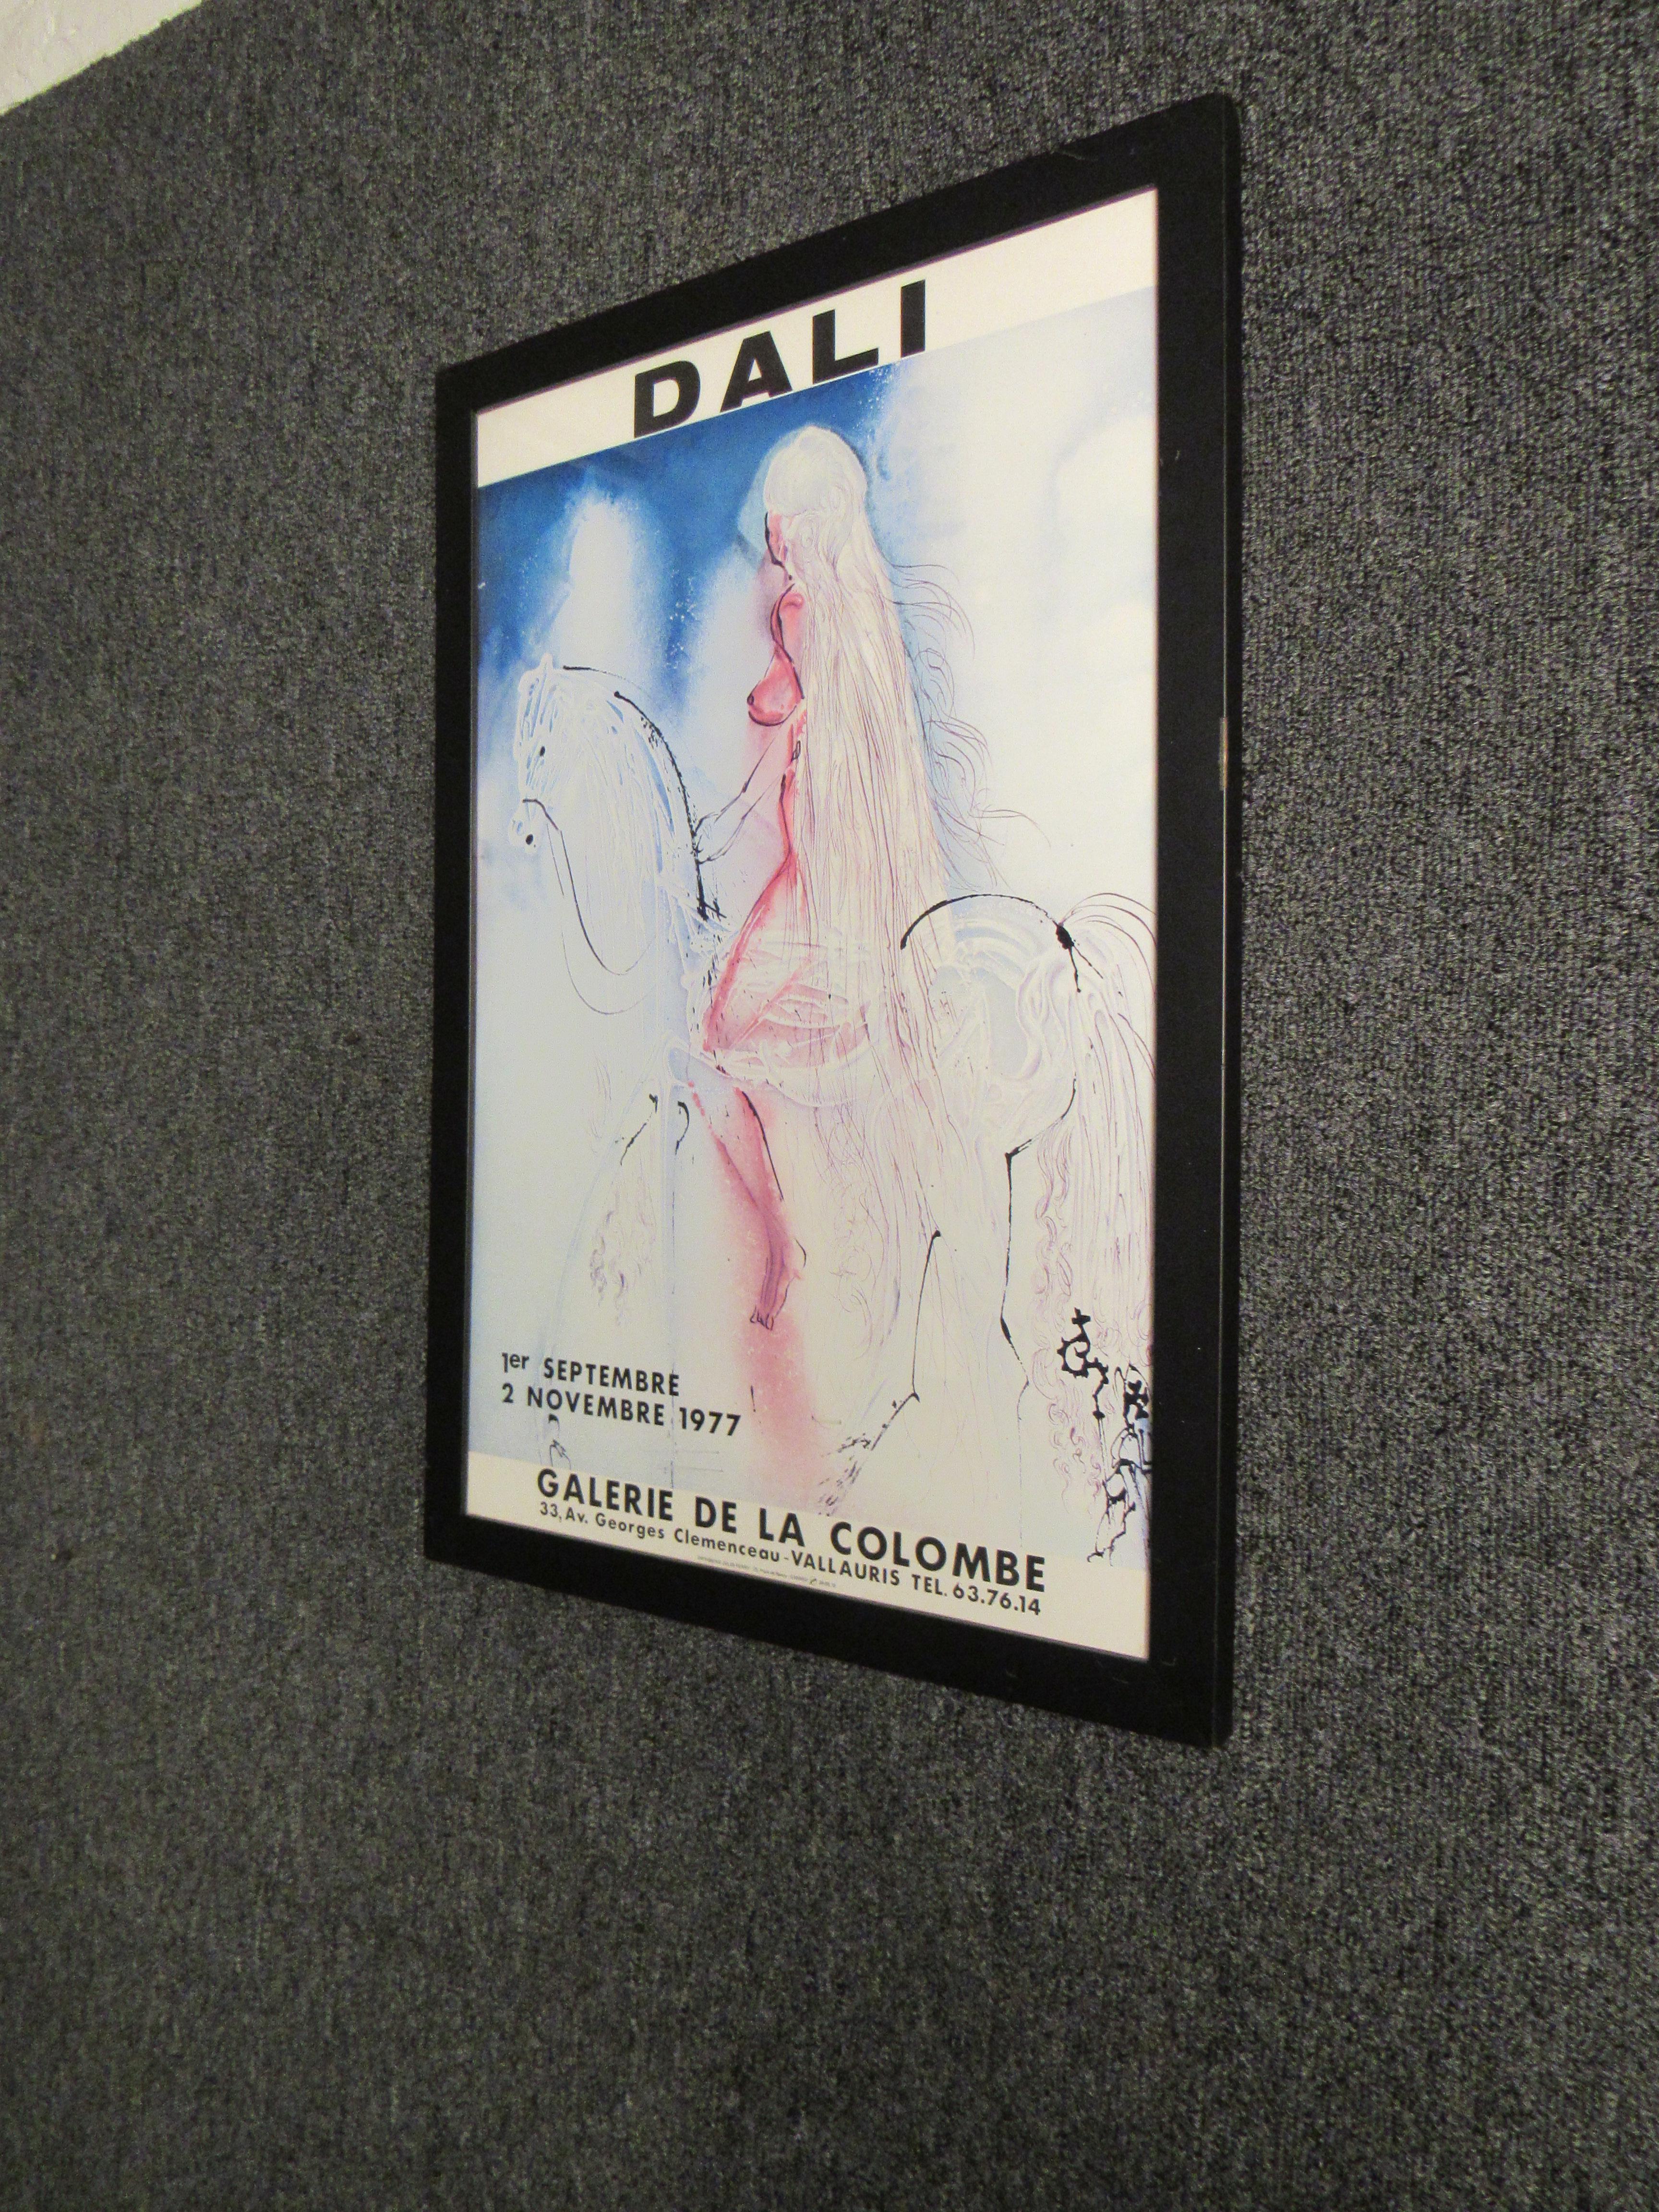 When it comes to true artistic genius, few names are mentioned more than that of Salvador Dali. An undeniable master of 20th century surrealism, Dali's work can be found in nearly every important art museum worldwide. This authentic vintage poster